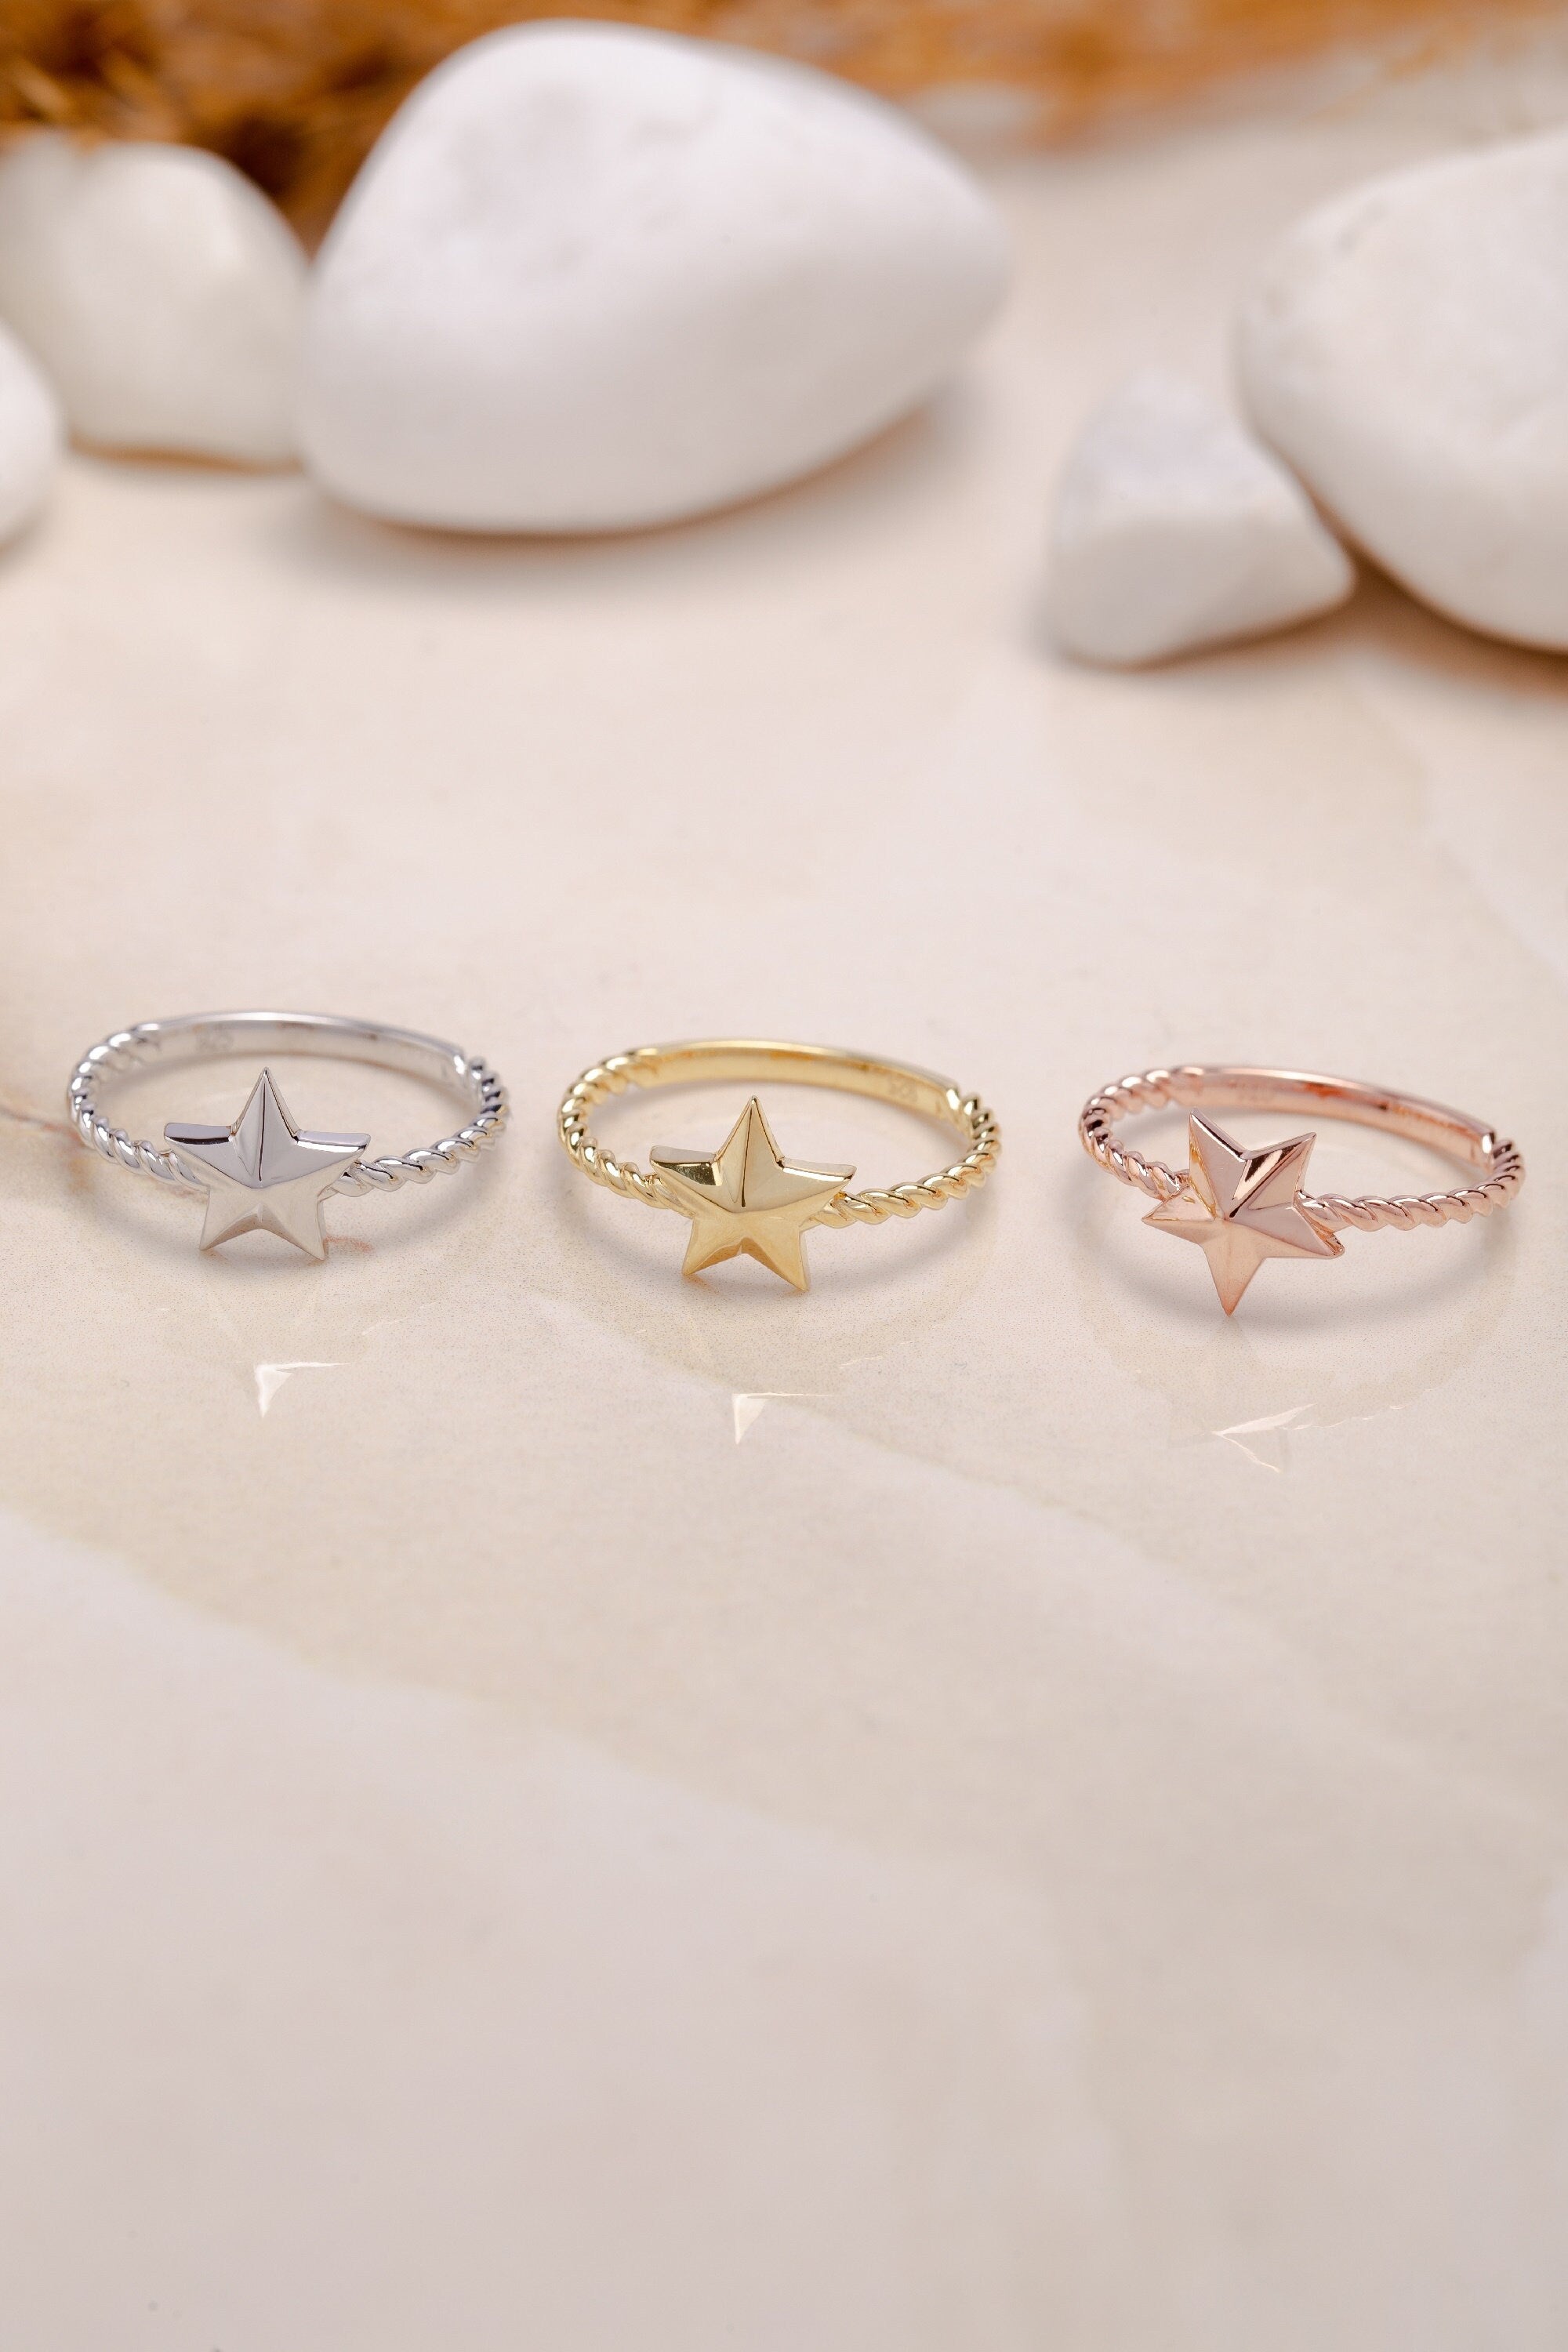 14K Gold Star Ring, Dainty Star Ring, Golden Ring, Galaxy Ring, Delicate Star Ring, Gift For Mother Day, Mother Day Jewelry, Gift for Her